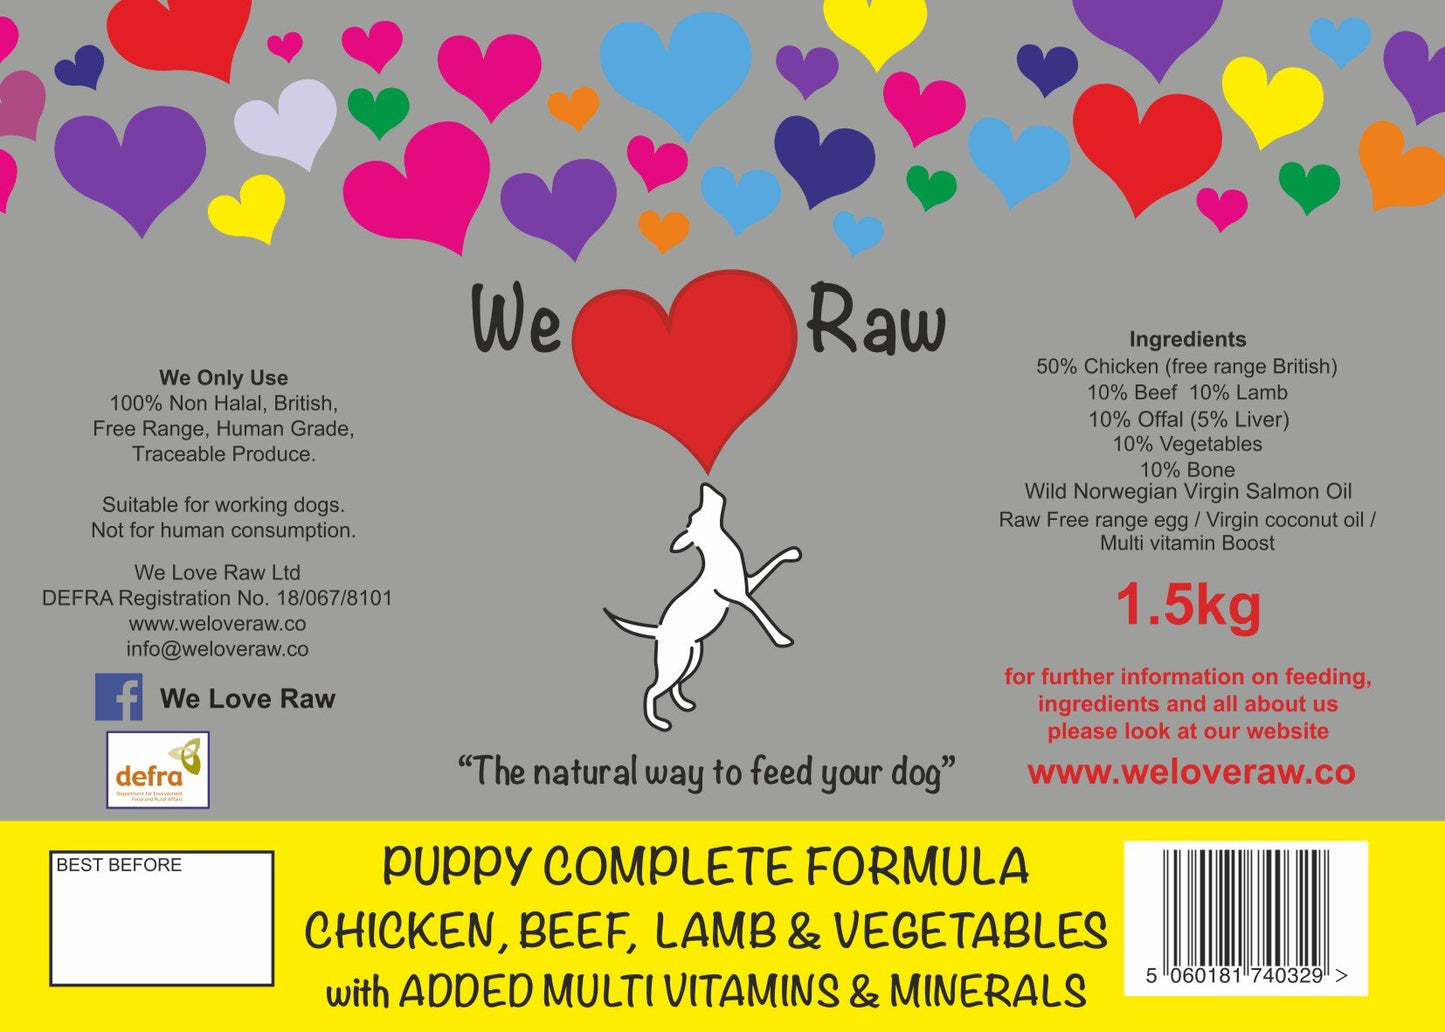 Puppy Complete Formula: Chicken, Beef, Lamb & Vegetables with Added Multivitamins & Minerals